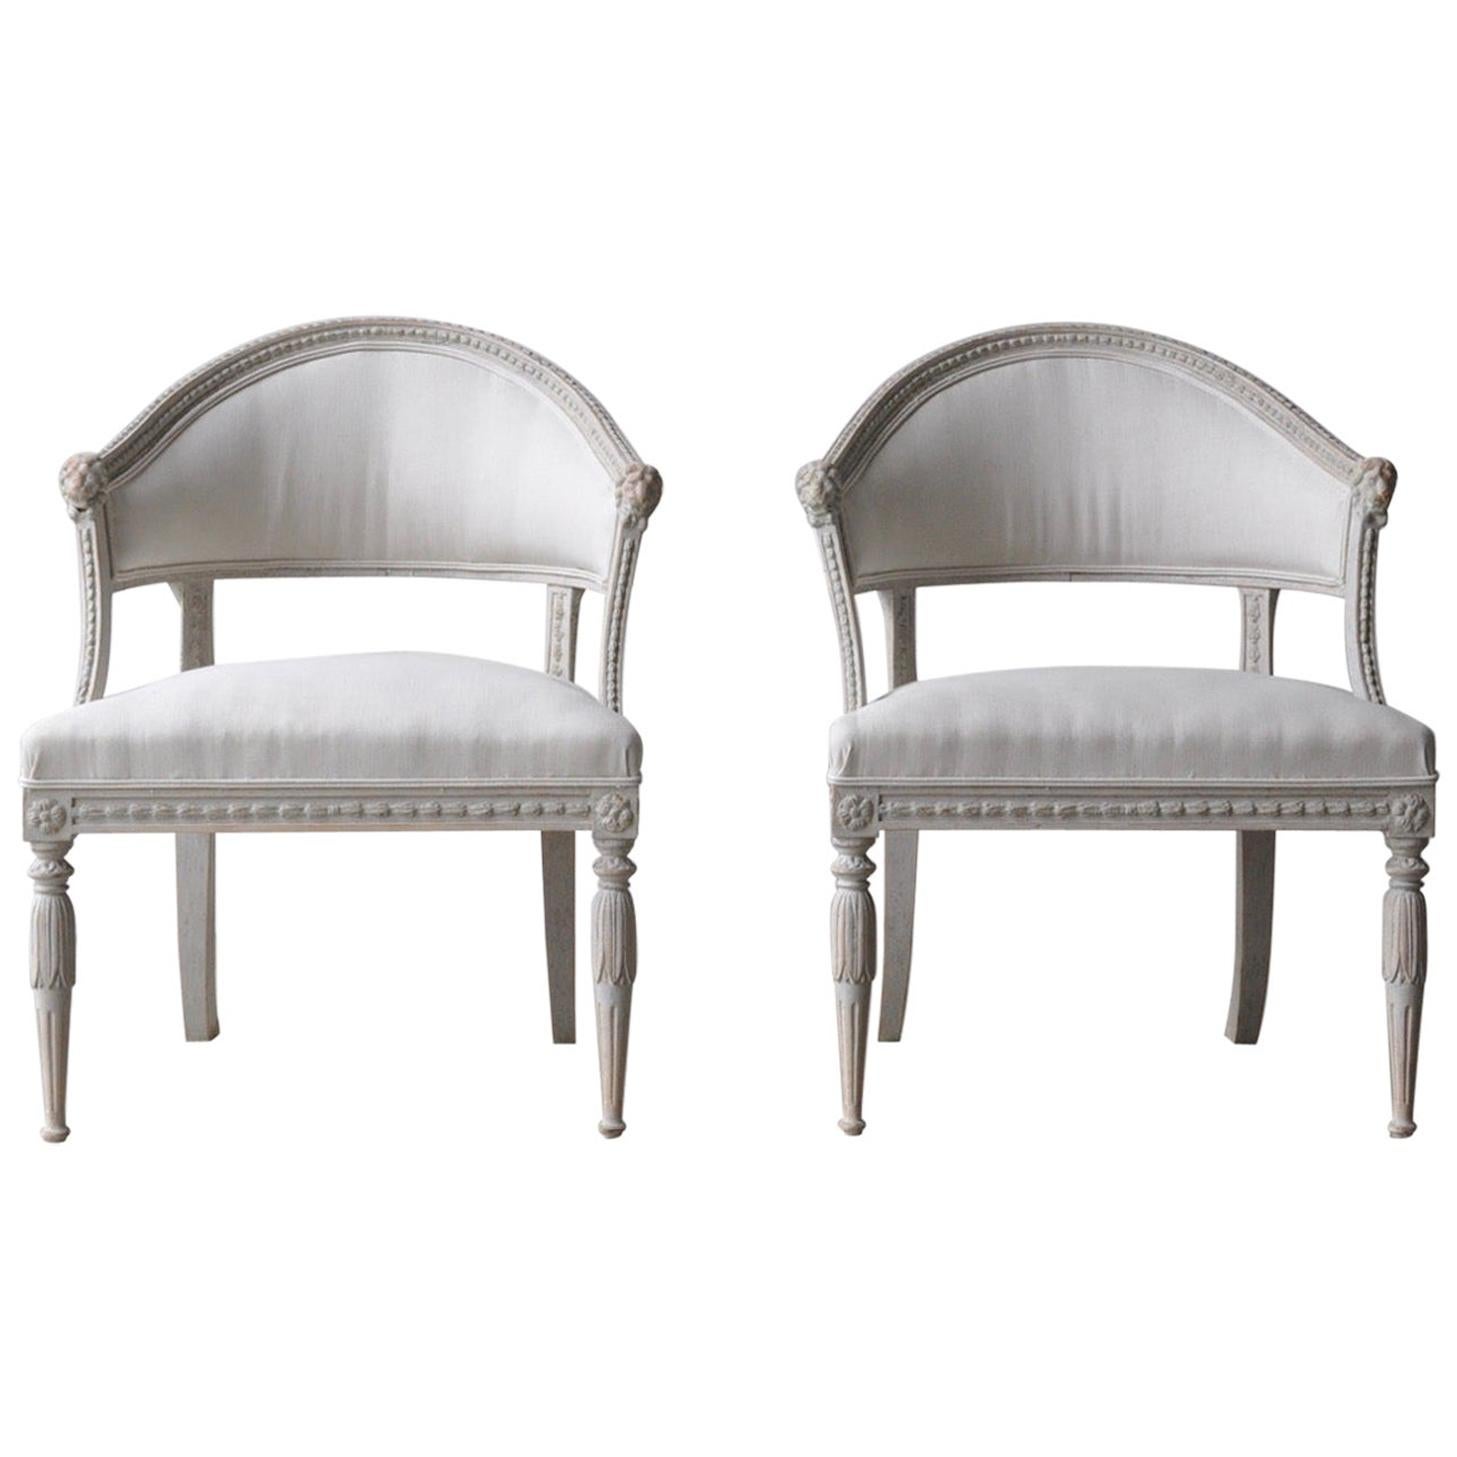 Pair of Swedish Gustavian Style Barrel Back Armchairs with Lions' Heads